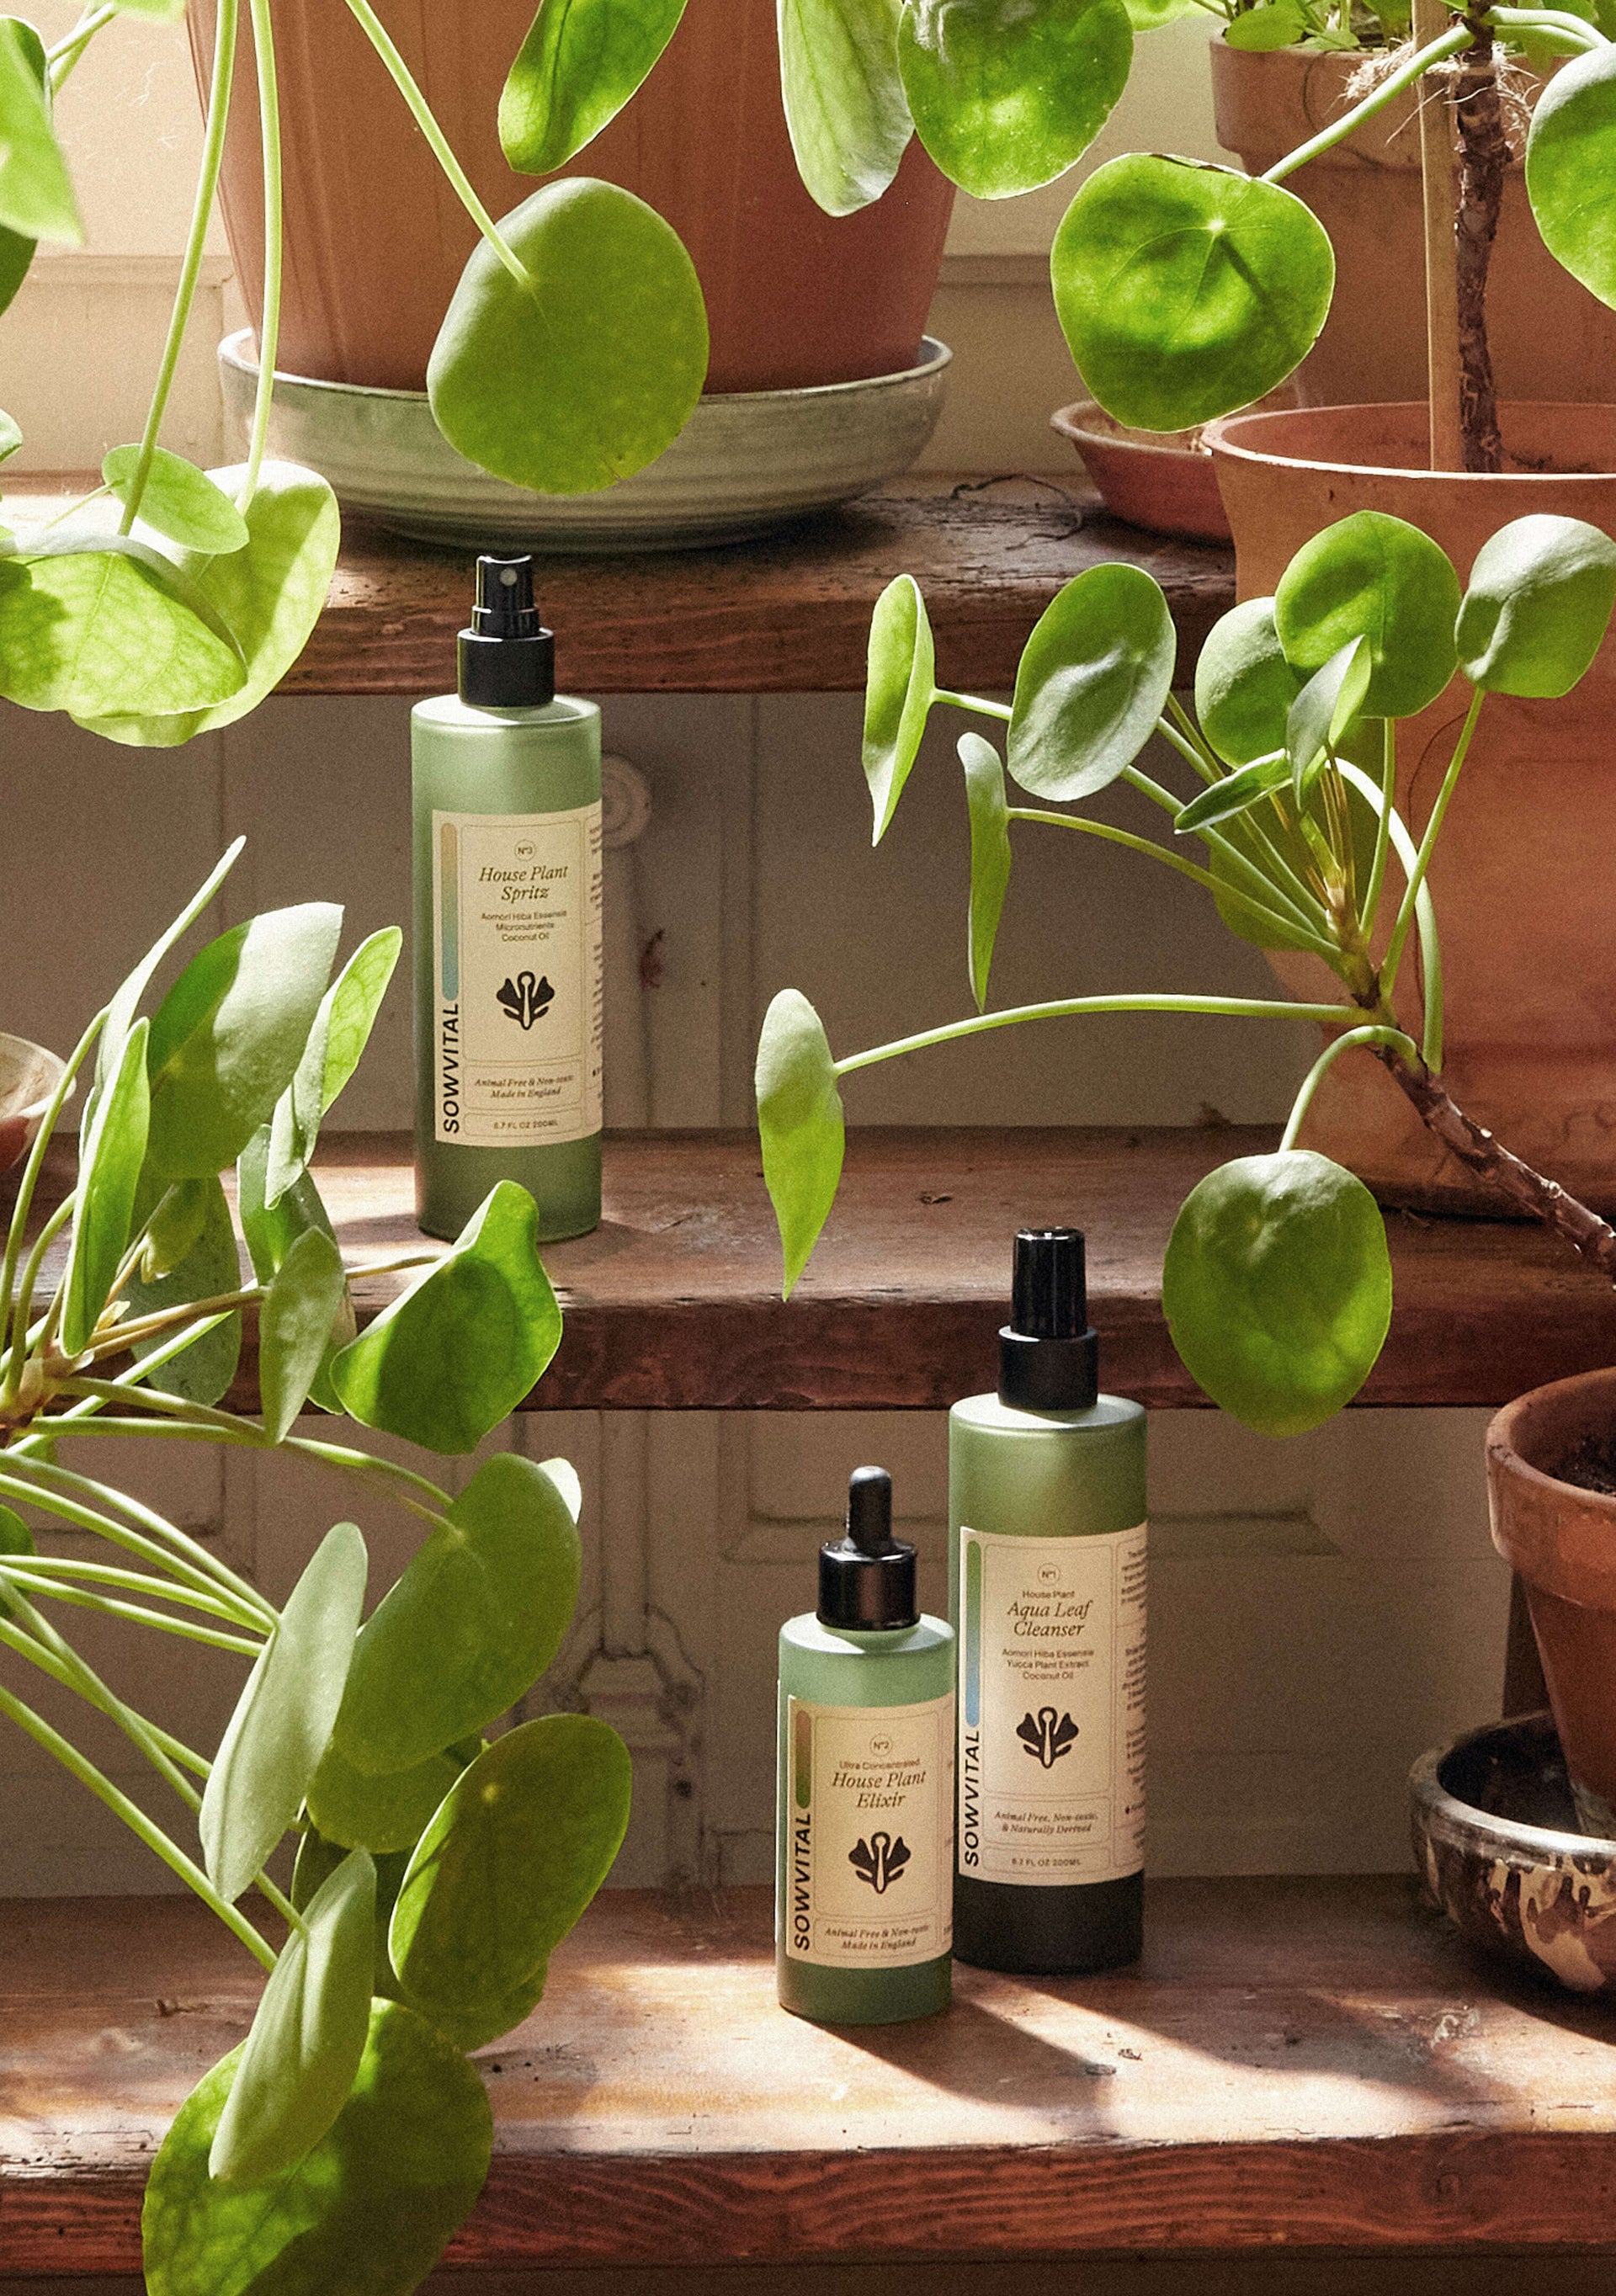 Sowvital house plant spritz, house plant elixir and aqua leaf cleanser sitting among loads of potted Chinese money tree.